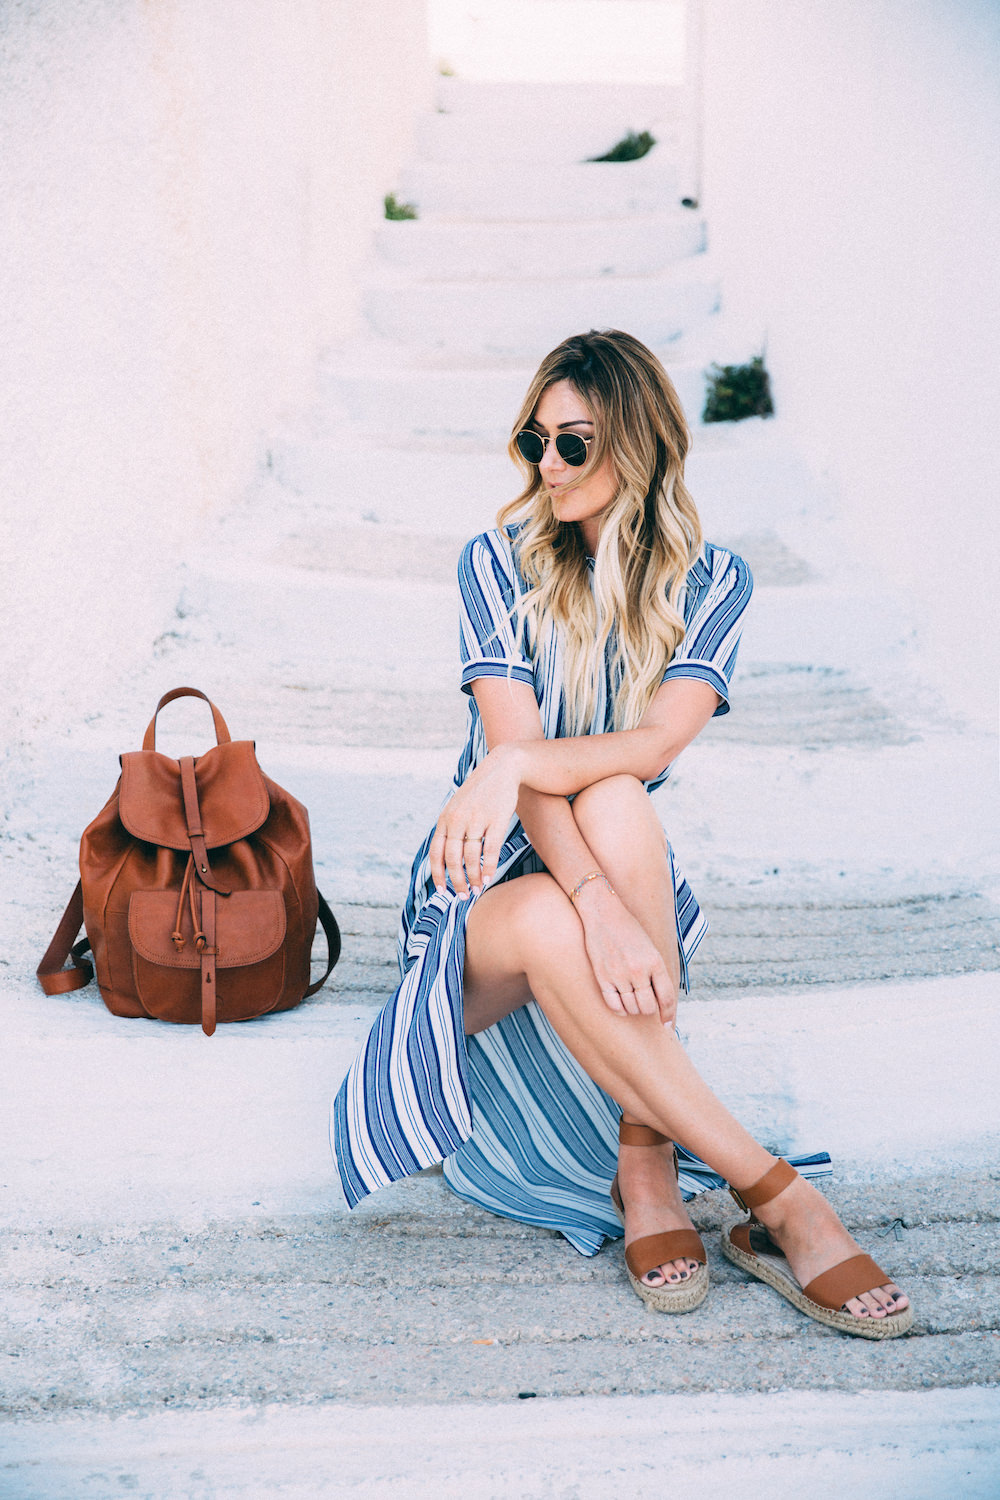 Caitlin Lindquist of the fashion and travel blog, Dash of Darling, shares her adventures in Pyrgos, Santorini Greece with Royal Caribbean Cruises in September.